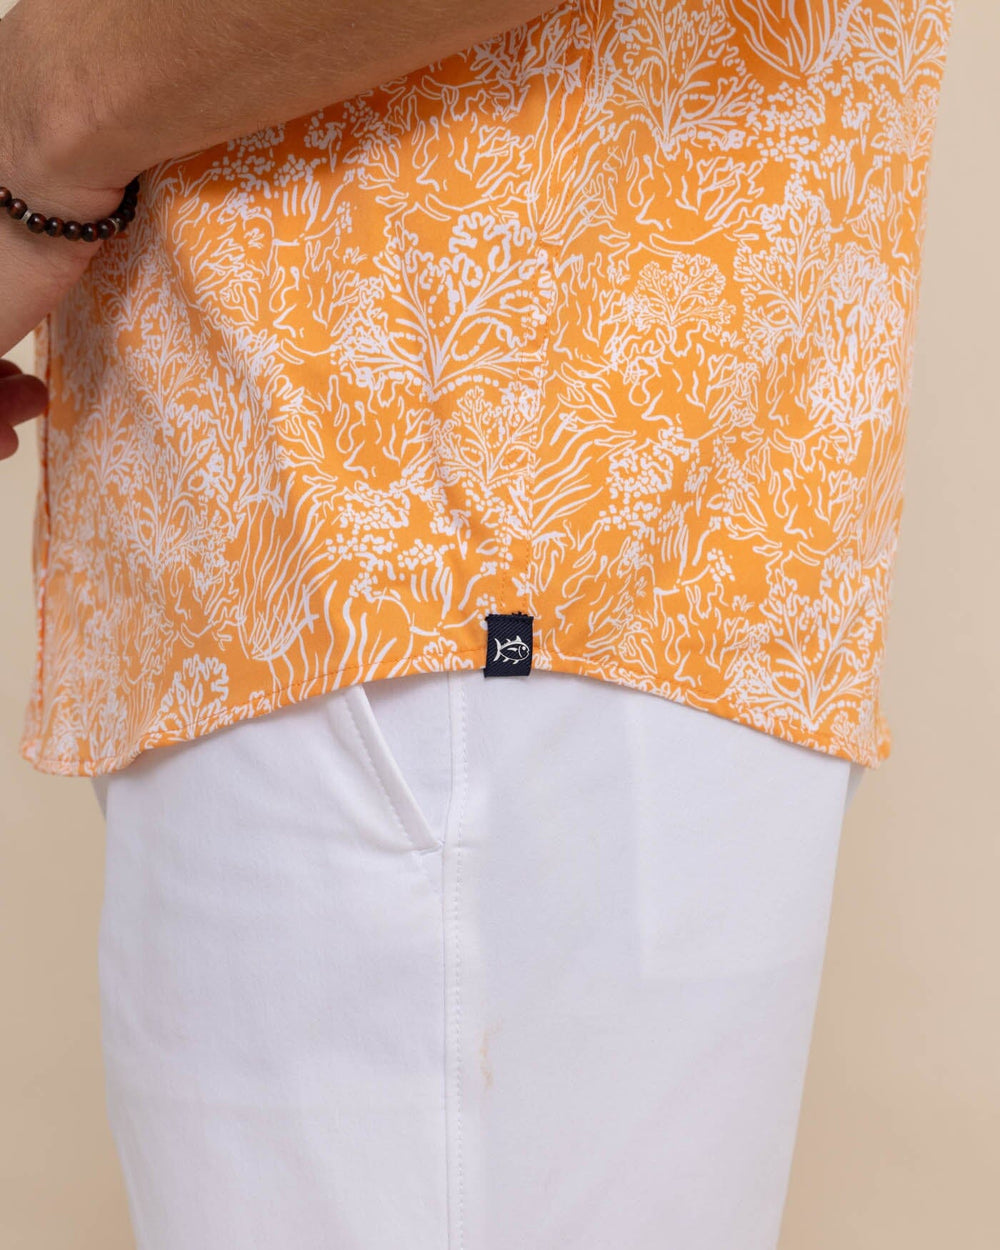 The detail view of the Southern Tide Floral Coral Intercoastal Short Sleeve Sport Shirt by Southern Tide - Tangerine Orange